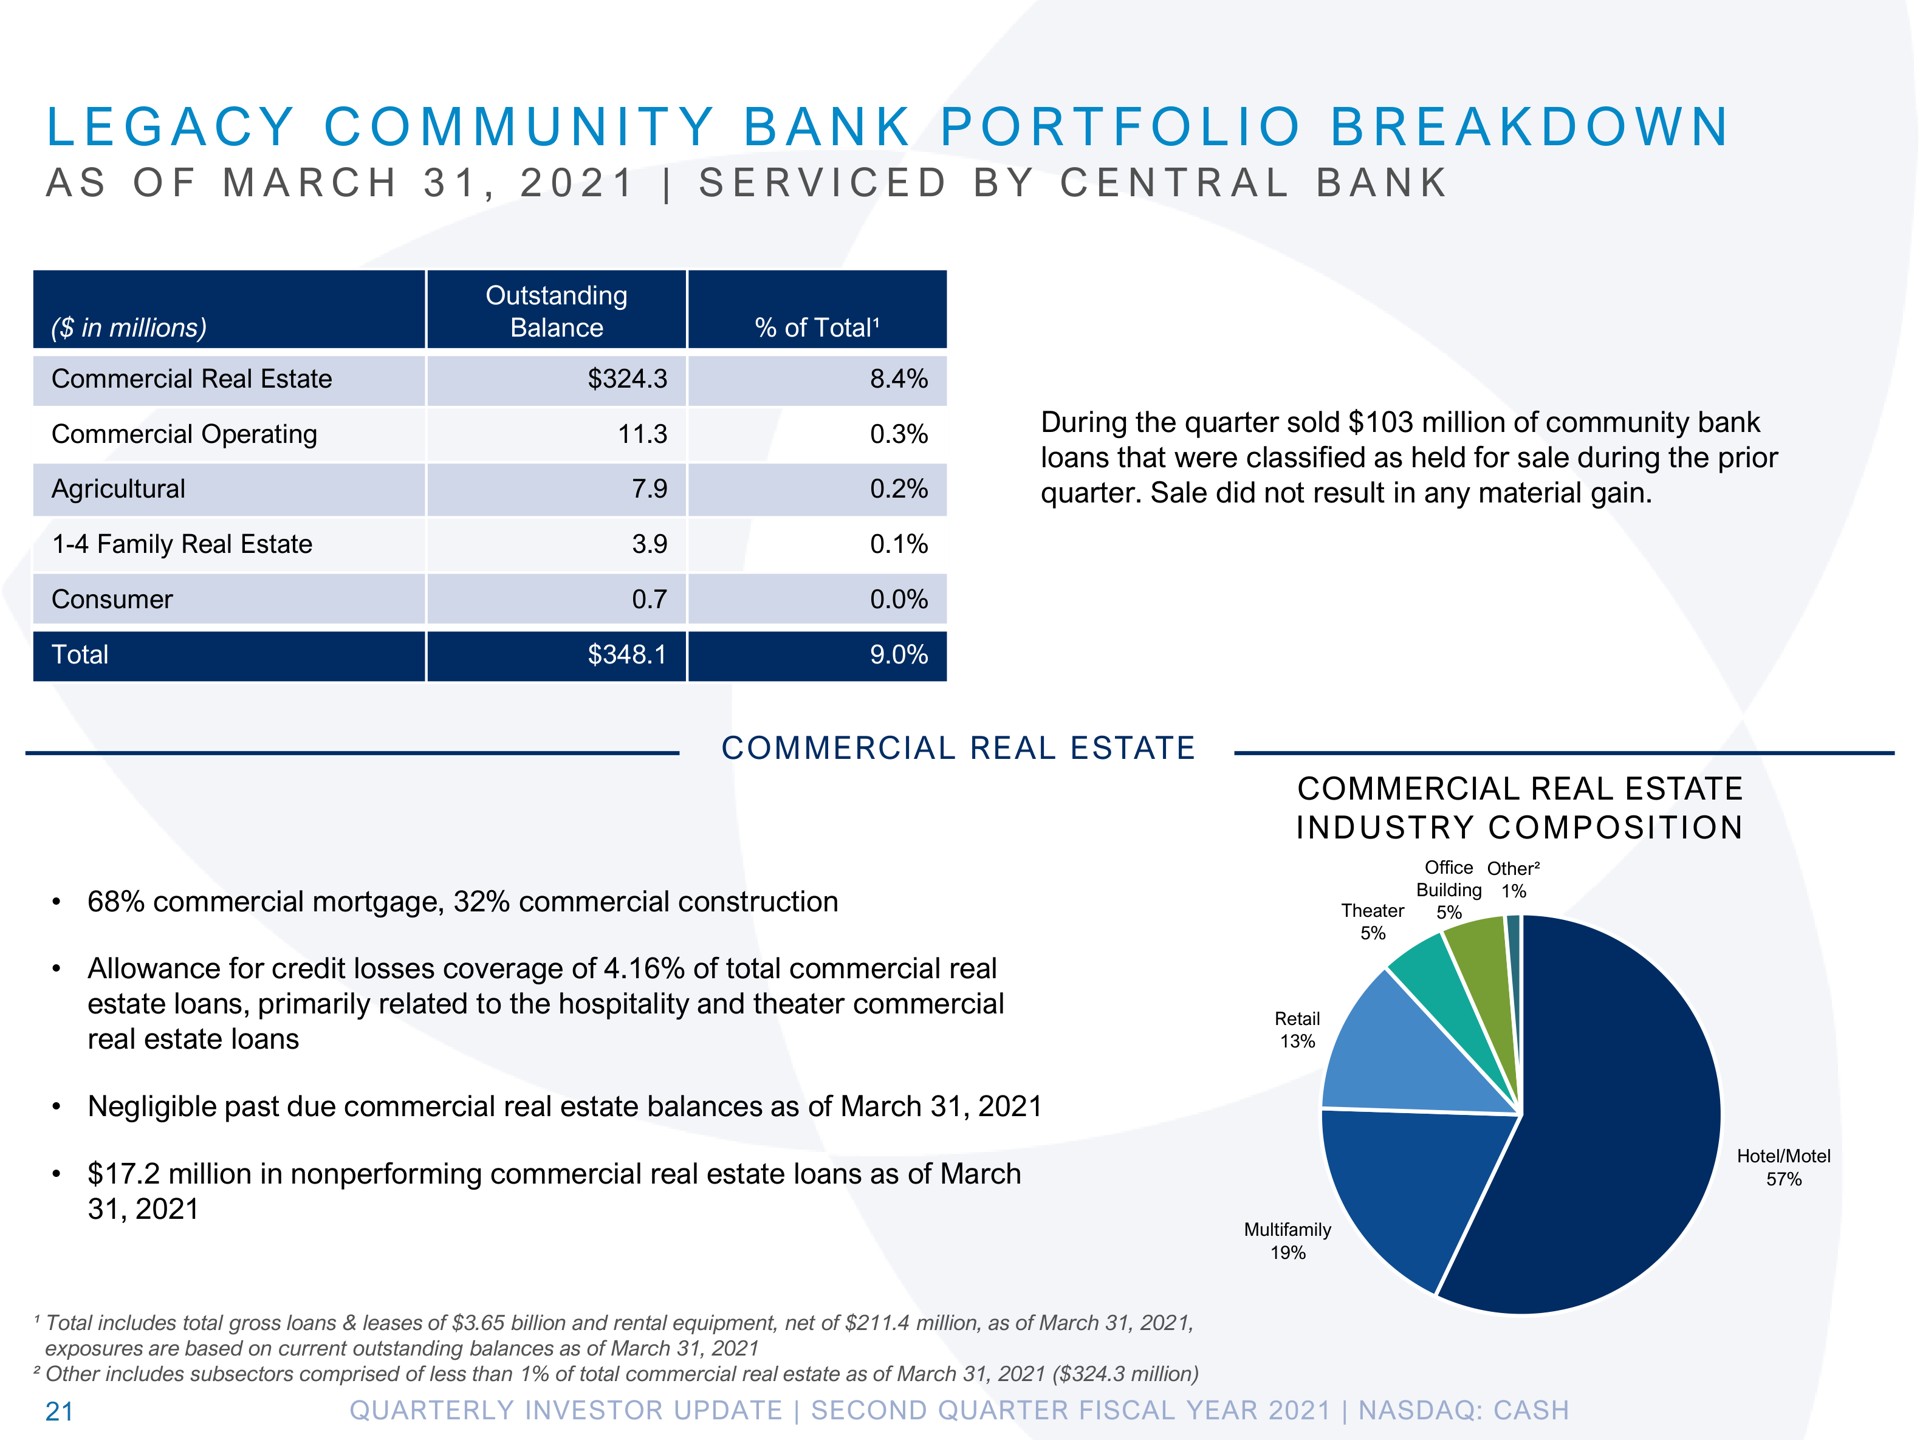 a i a i a a a i a a legacy community bank portfolio breakdown as of march serviced by central bank | Pathward Financial